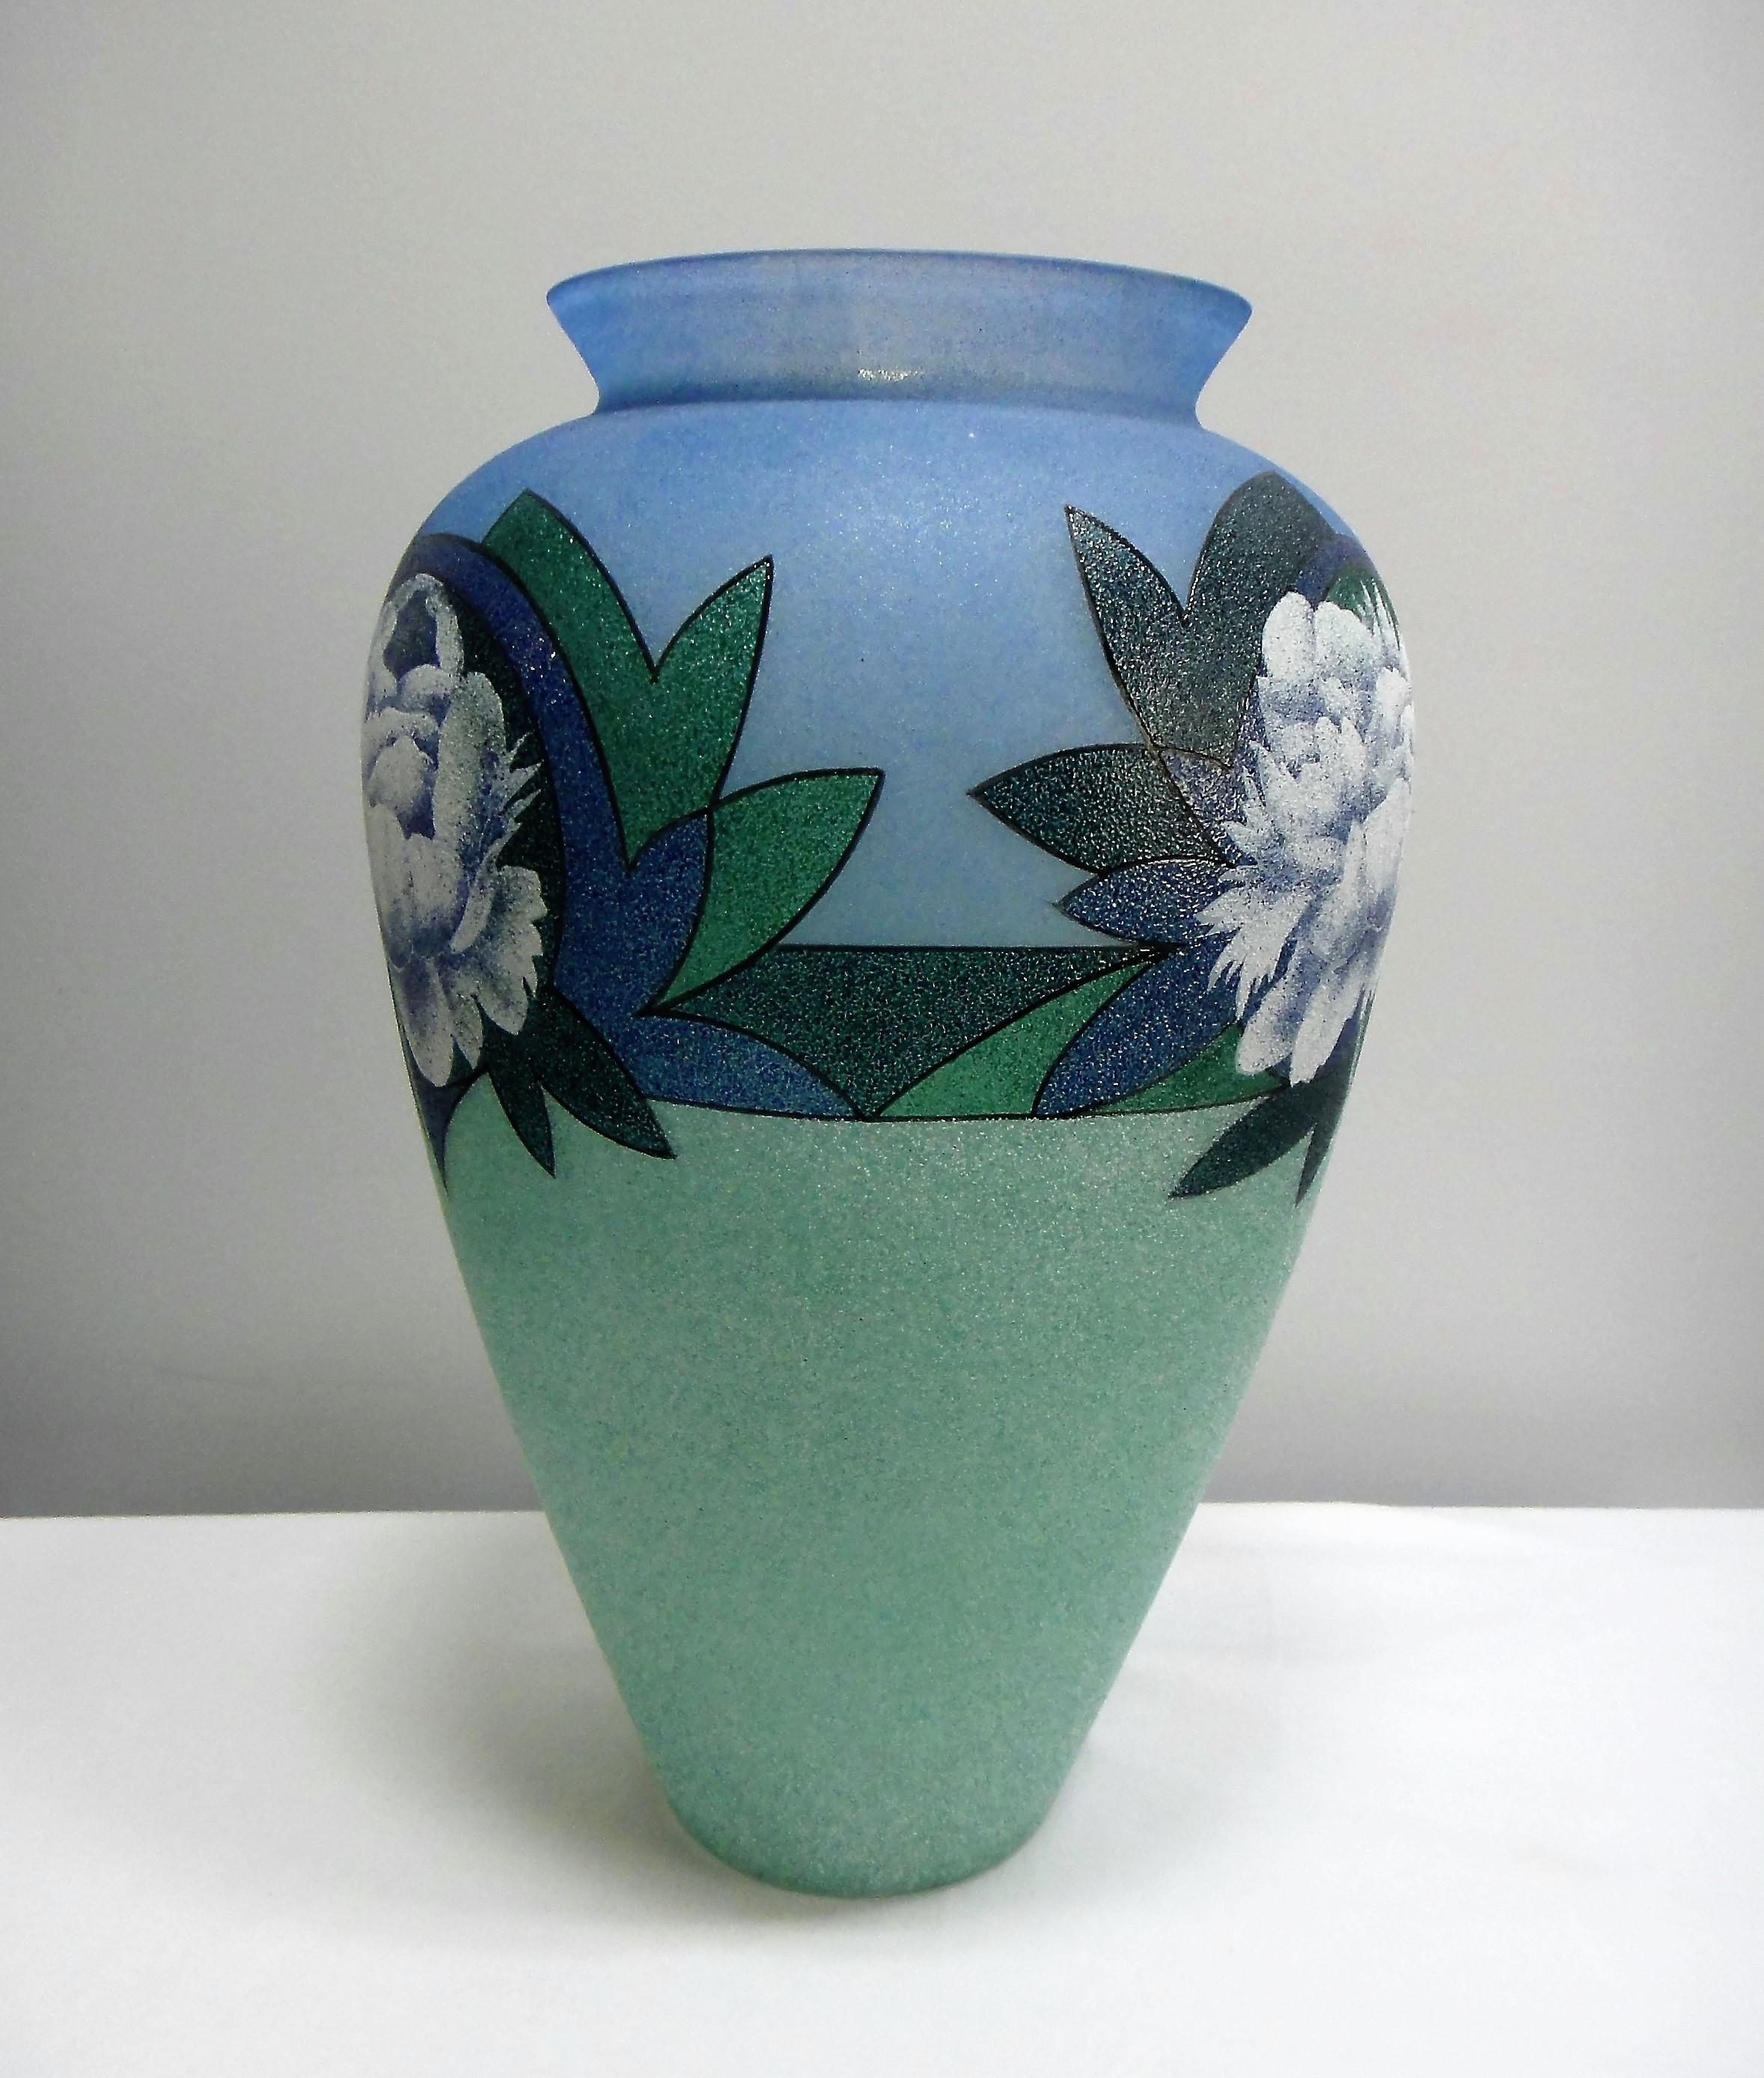 Biancalani Elio Glass Grit Vase from Florence, Italy offered for sale is a large Biancalani Elio hand blown and decorated art glass vase with a graniglia glass grit finish. The vase has a floral motif and is created in the Art Deco style.